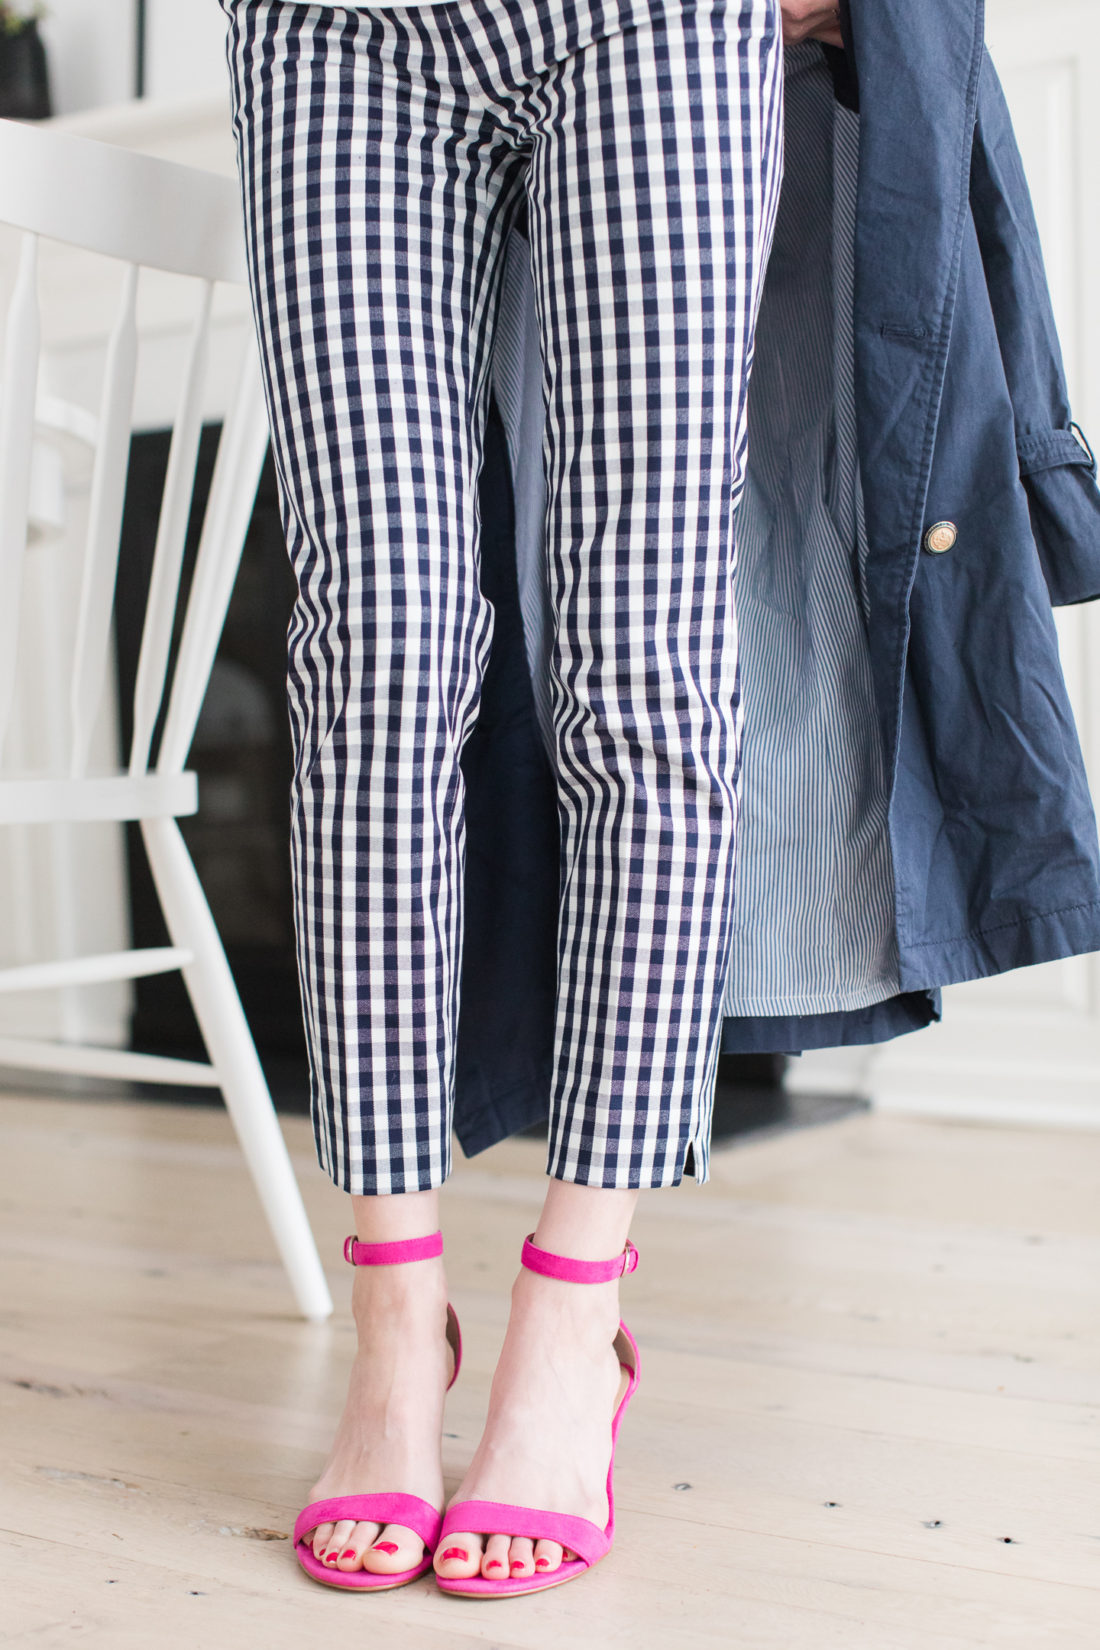 Blue and white gingham pants, hot pinks heels, and a navy trench are all part of a secondhand outfit of clothes put together by Eva Amurri Martino from thredUP